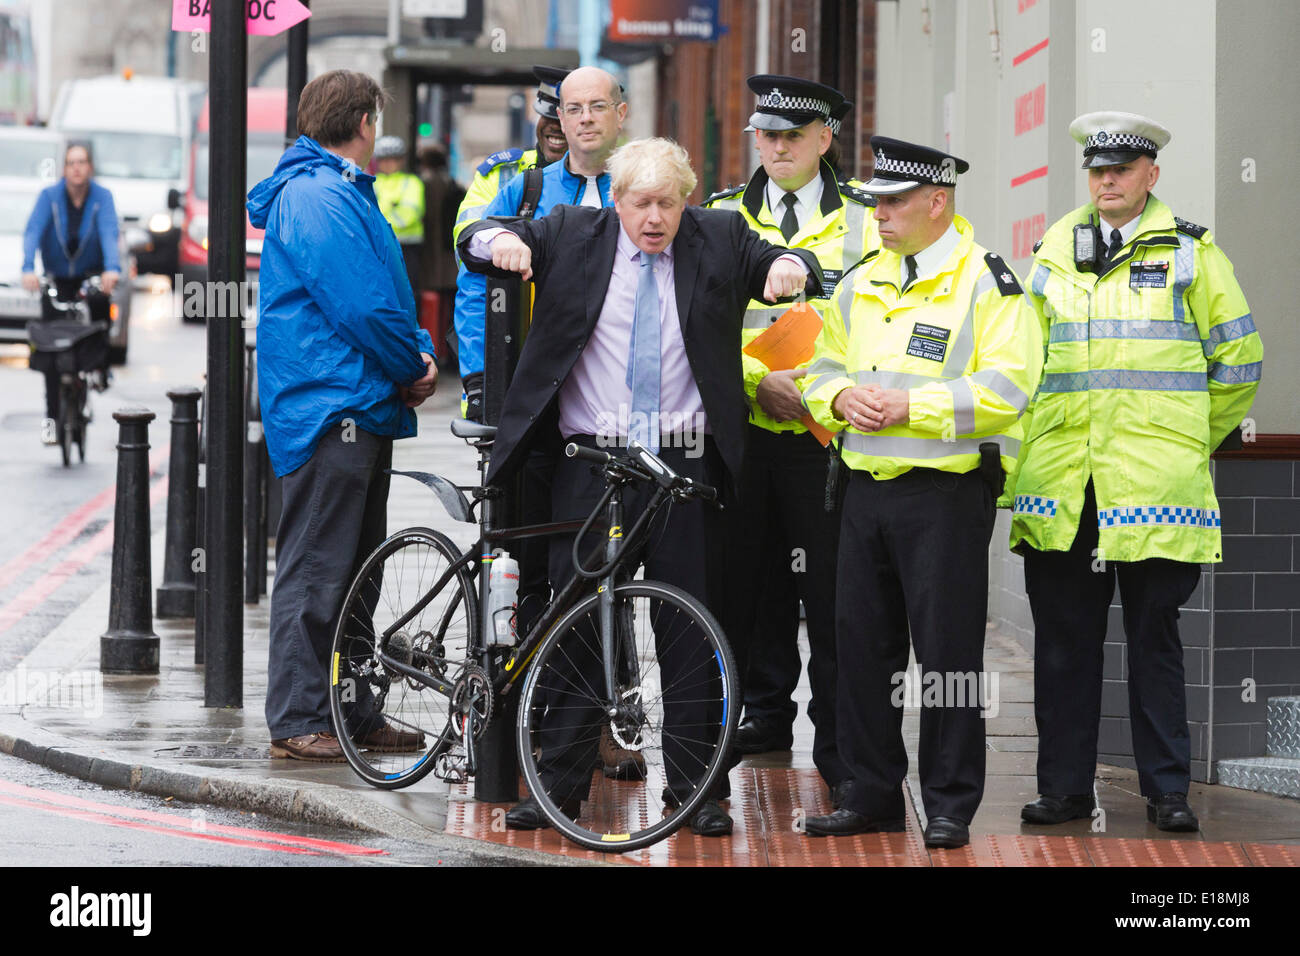 London, UK. 27 May 2014. Photocall with Boris Johnson and officers of the Met Police. London Mayor Boris Johnson backs police road safety operations as serious cyclist injuries fall by 28 per cent in 2013 compared to 2012. Serious injuries to cyclists were down to 465 in 2013 from 657 in 2012. One in 433,000 cycle journeys made in London in 2013 ended in the cyclist being killed or seriously injured. Stock Photo